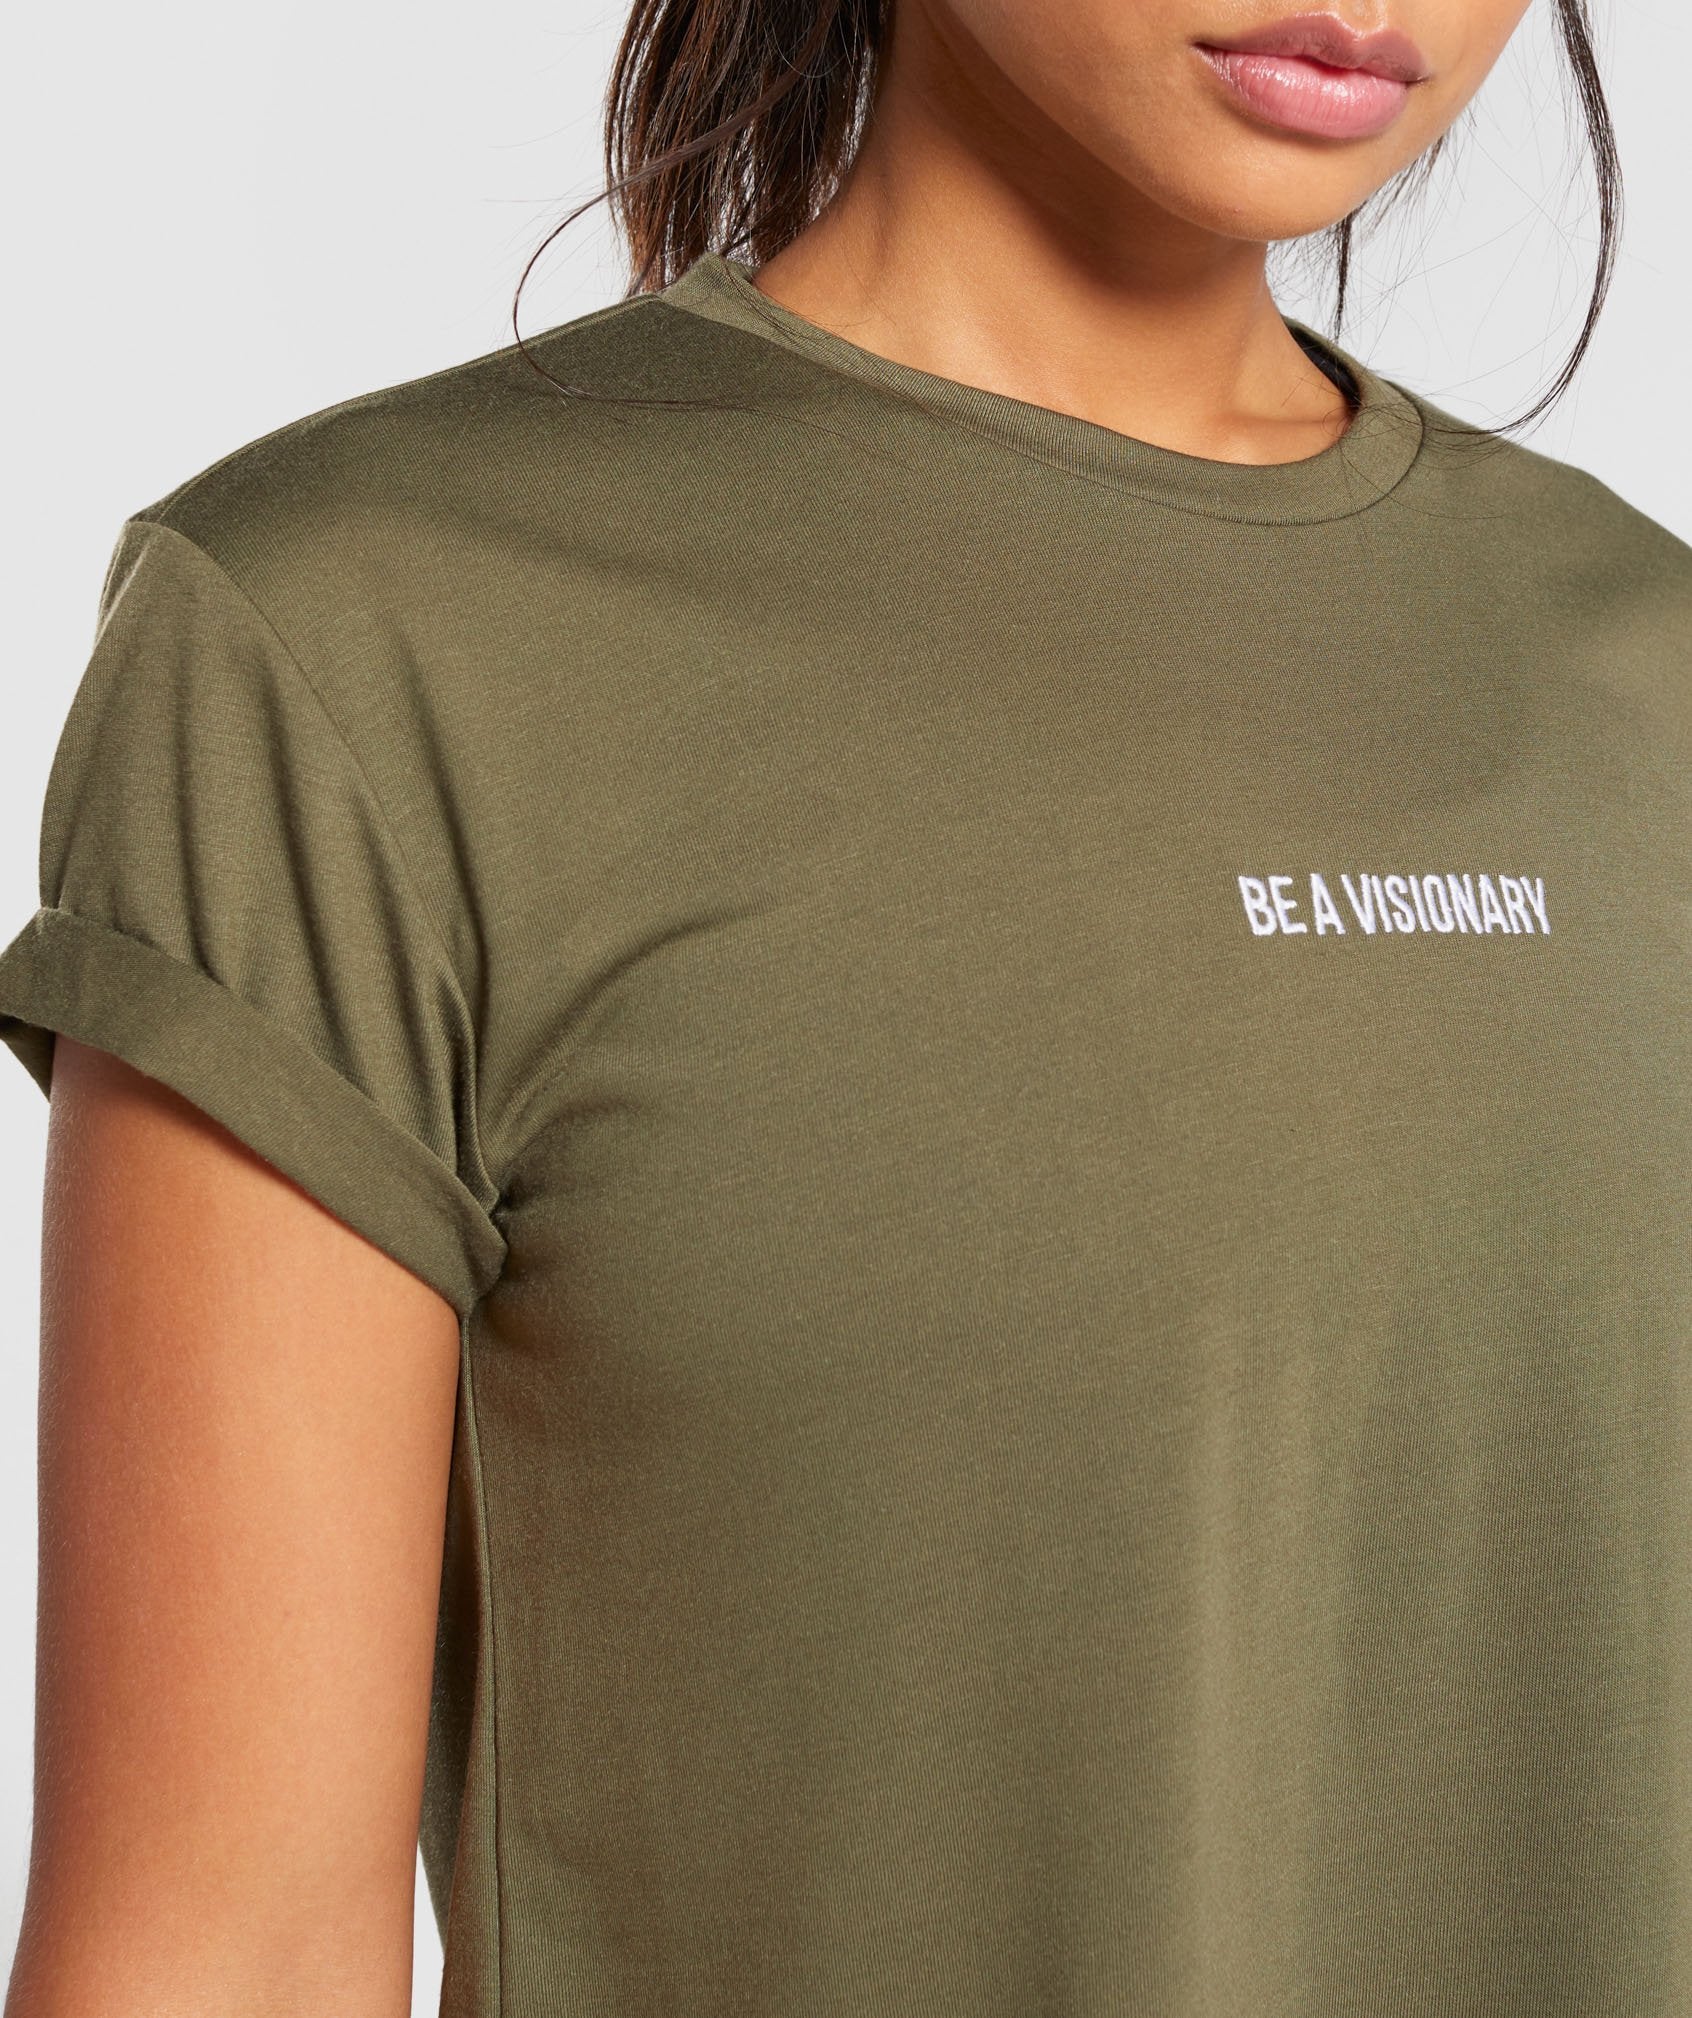 Essential Be a Visionary Tee in Khaki - view 5